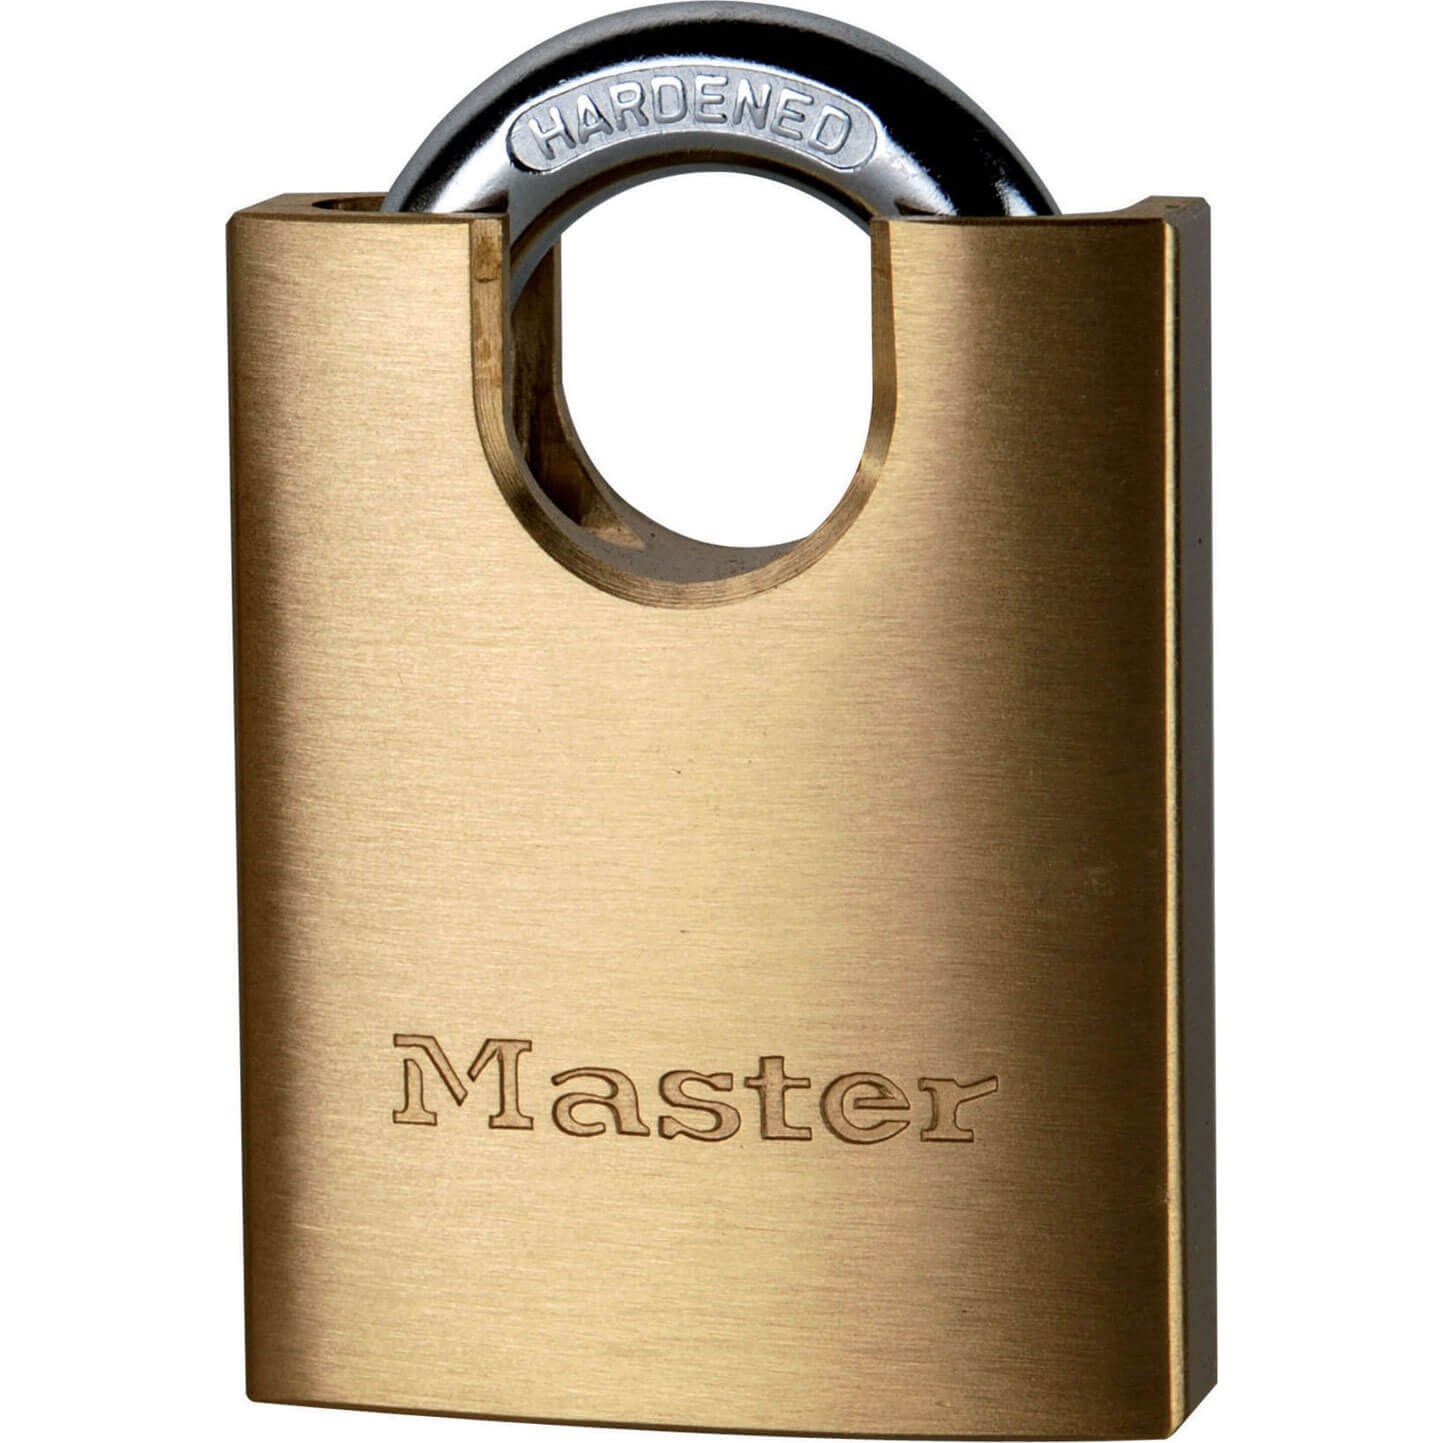 Image of Masterlock Solid Brass Padlock and Closed Shackle 50mm Standard